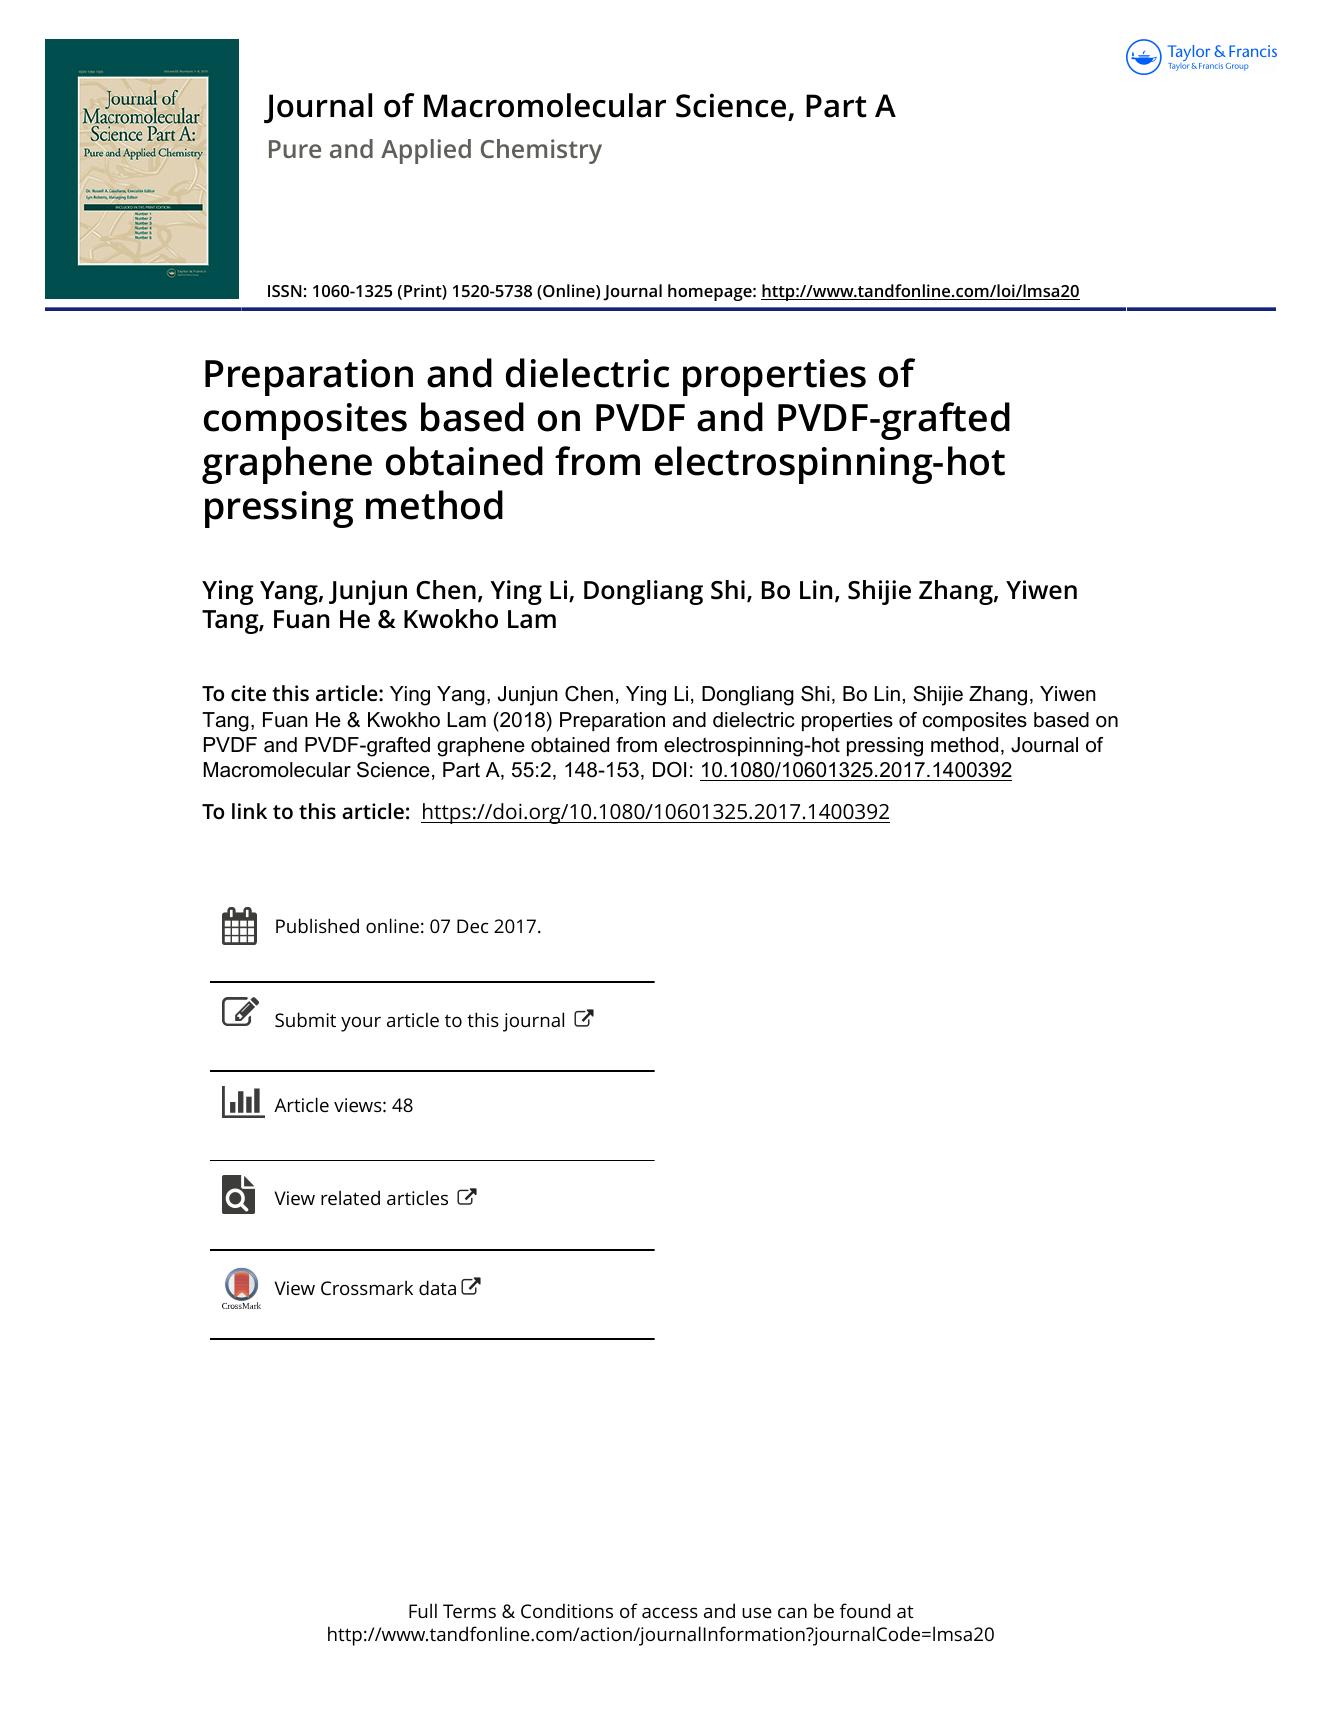 Preparation and dielectric properties of composites based on PVDF and PVDF-grafted graphene obtained from electrospinning-hot pressing method by unknow